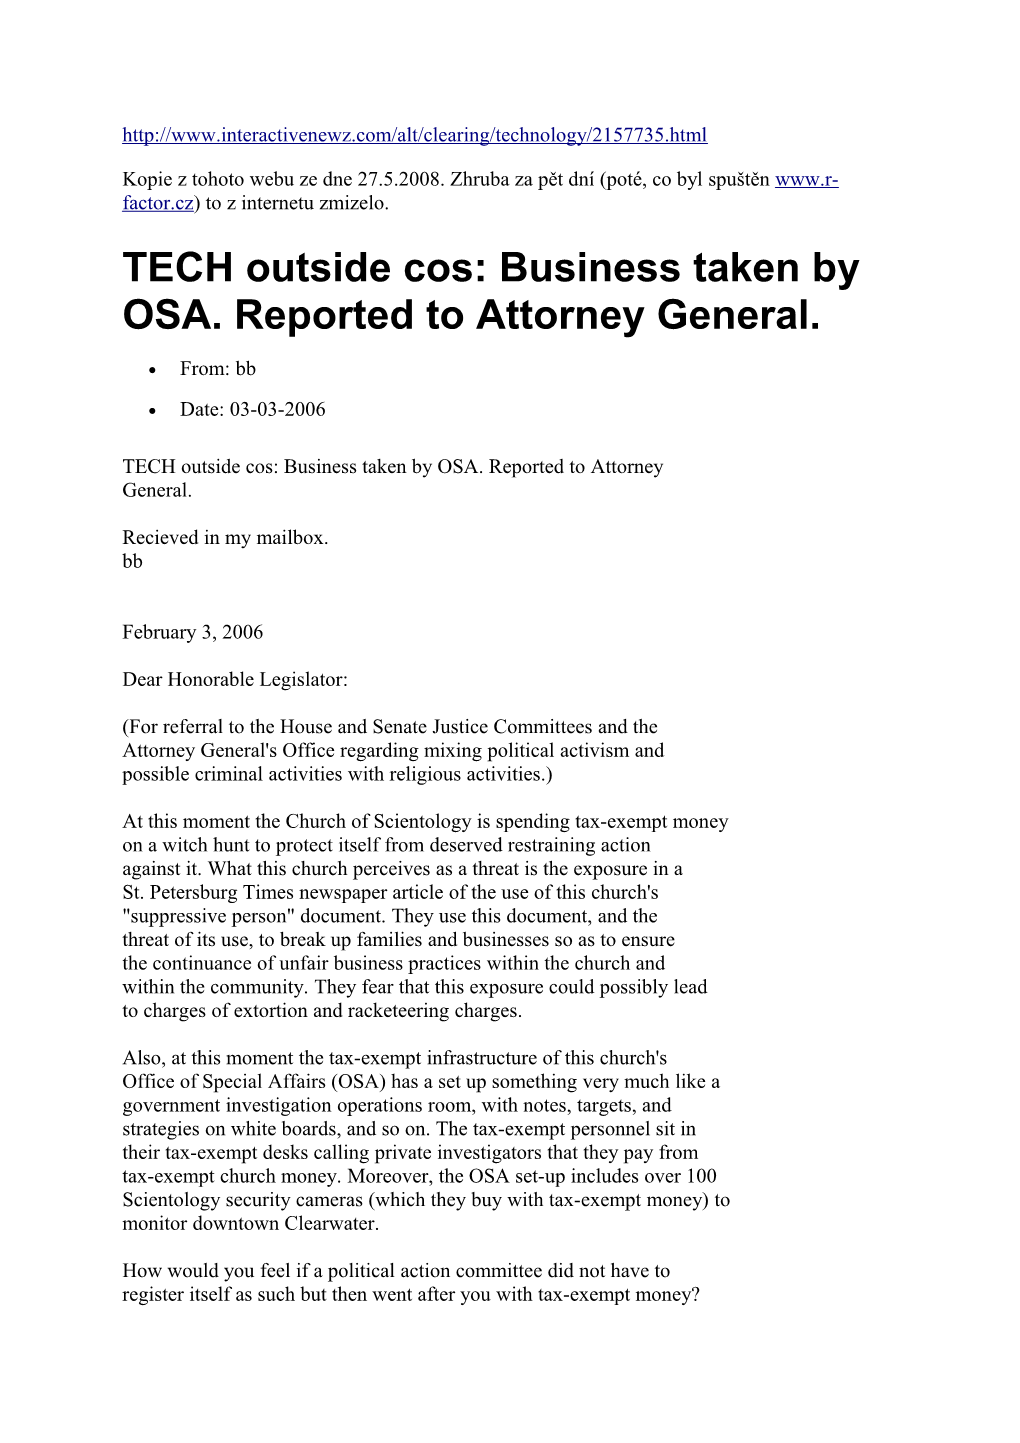 TECH Outside Cos: Business Taken by OSA. Reported to Attorney General